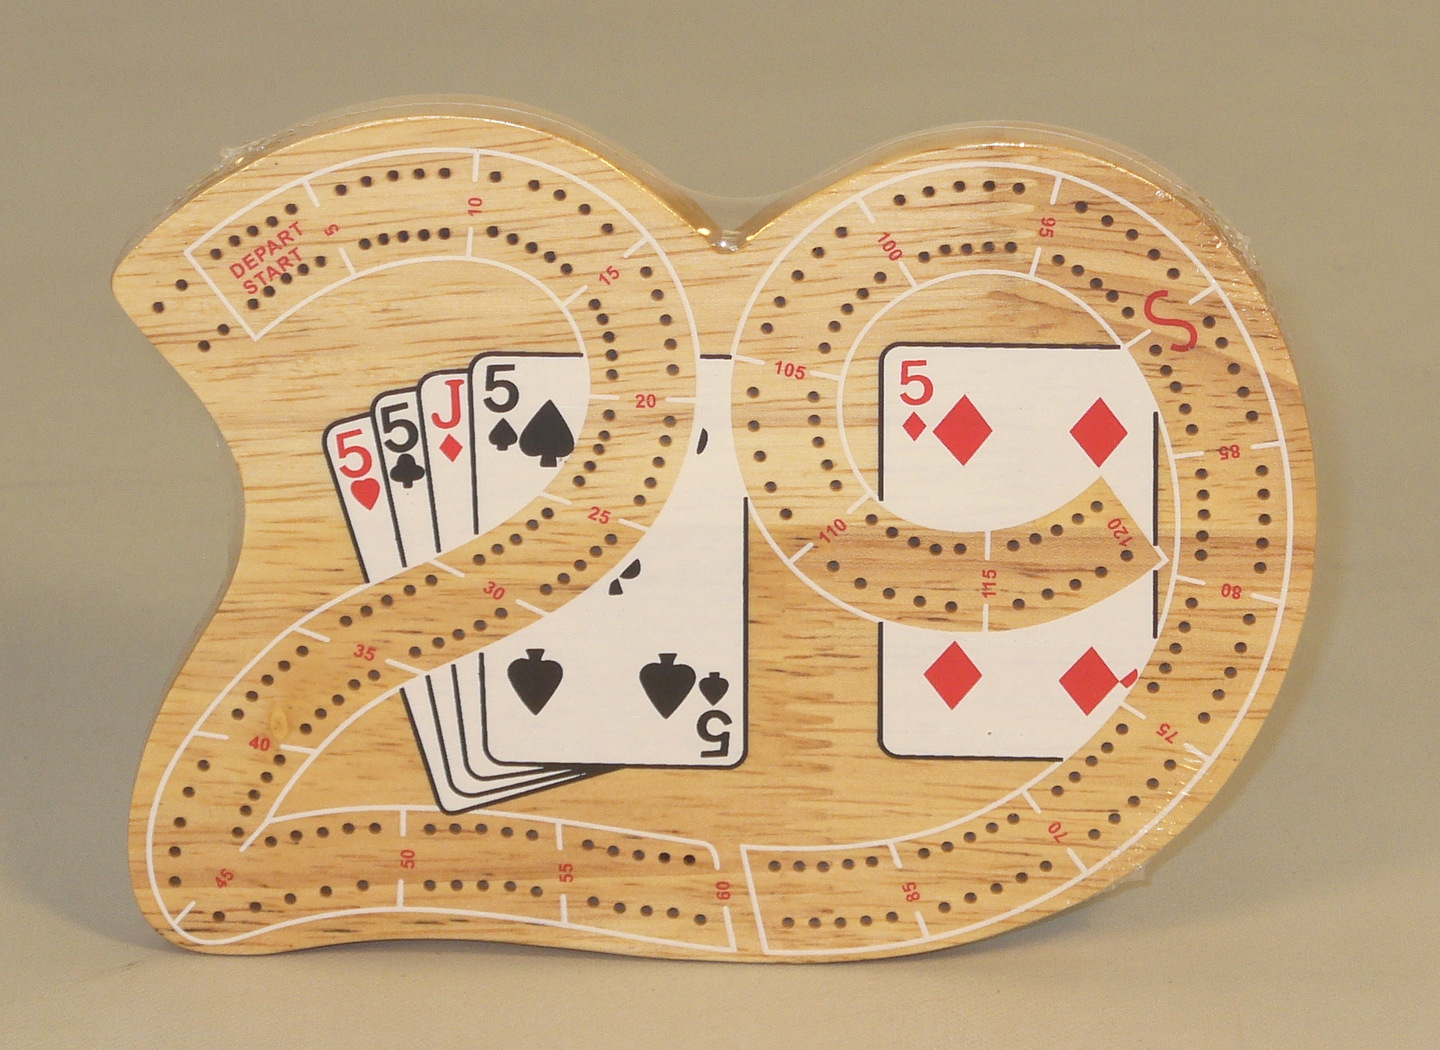 CRIBBAGE: TWO-PLAYER MINI 29 